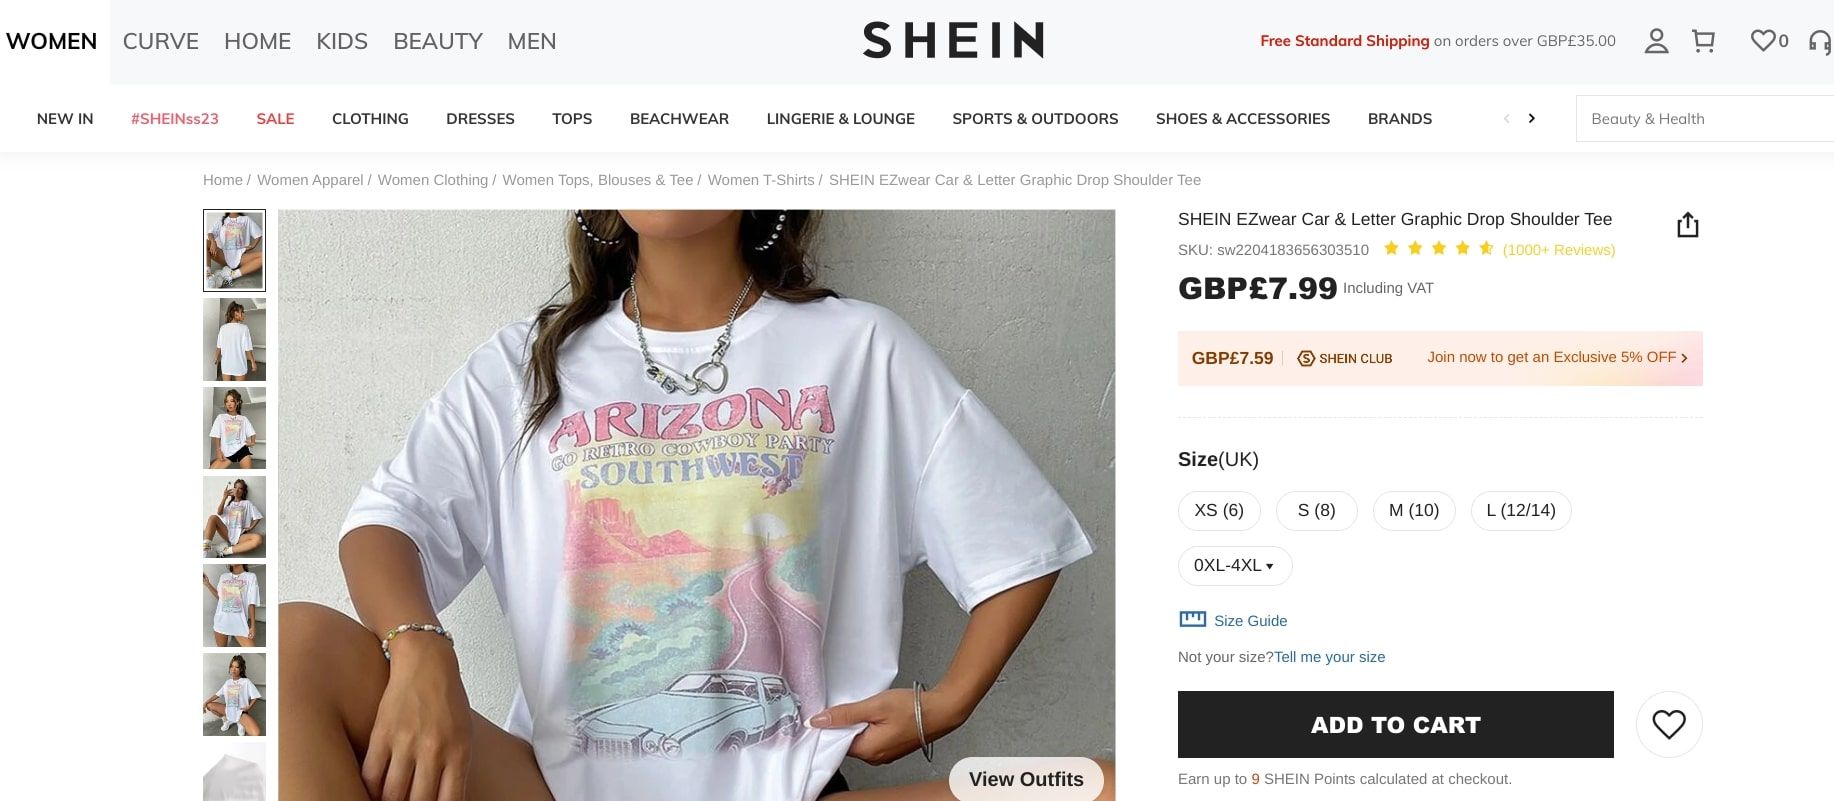 I BOUGHT CLOTHING FROM SHEIN IS IT A SCAM!? 